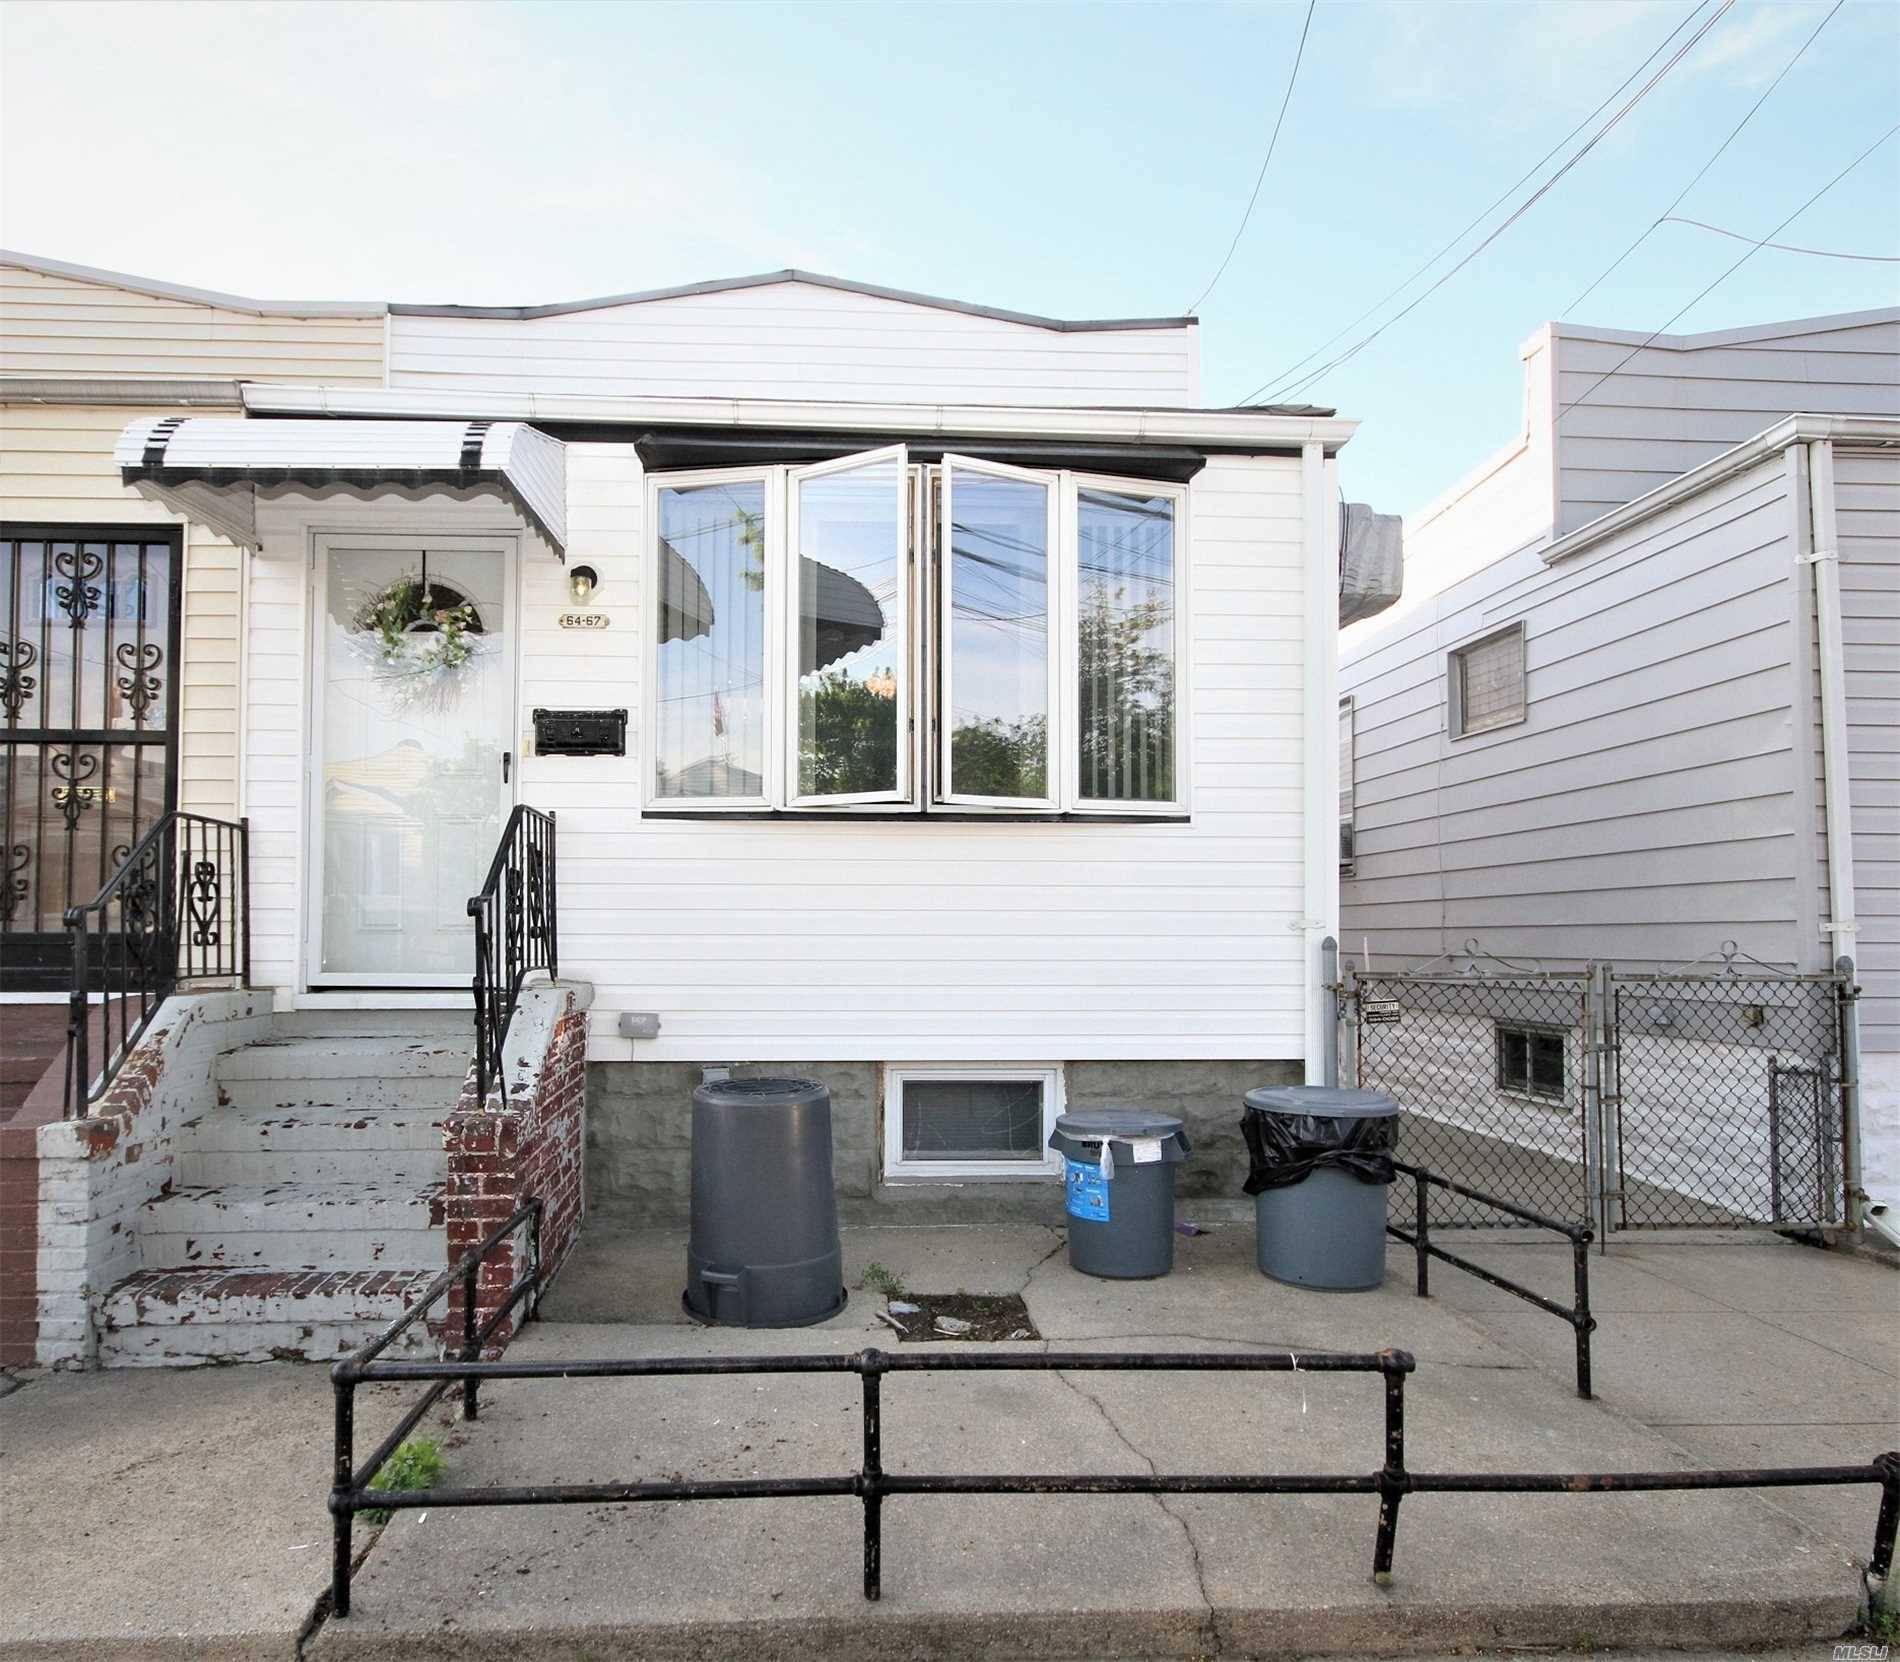 Great Opportunity To Purchase A Single Family Home In A Quiet Maspeth Location; Beautiful Bungalow Style Home In Absolute Move-In Condition.